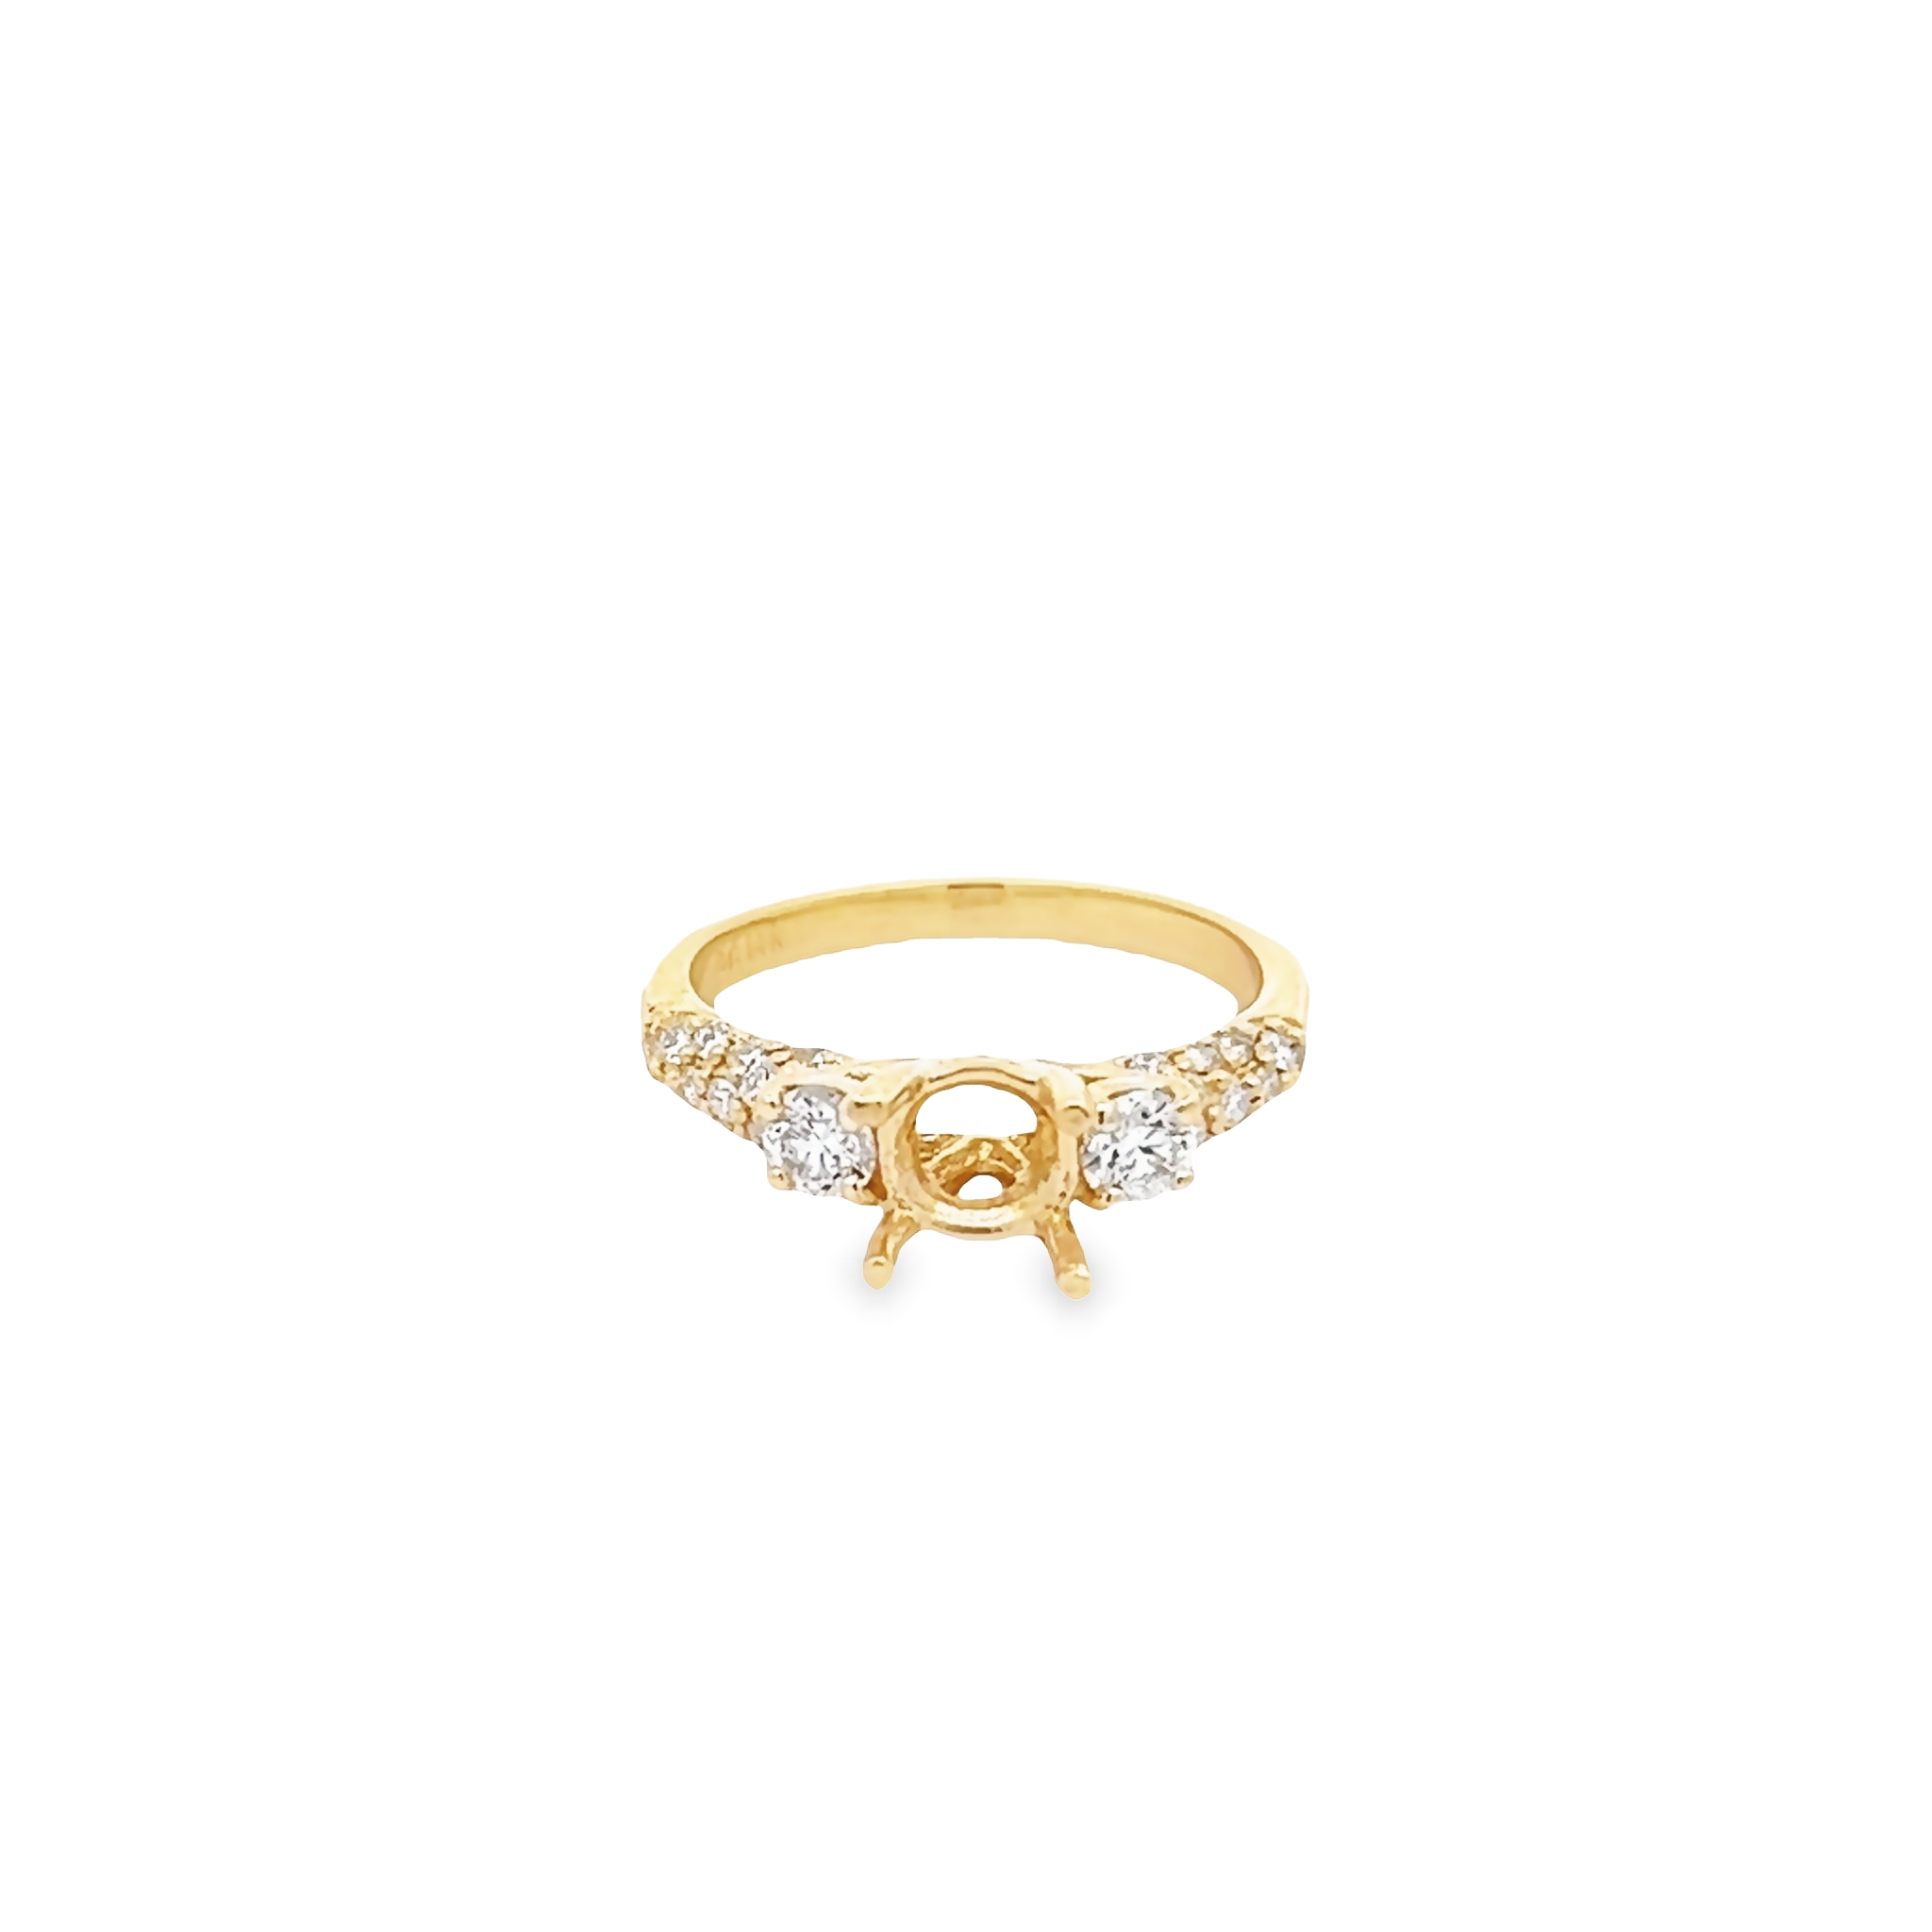 14 Karat Yellow Gold Semi Mount Engagement Ring With 28=0.64 Total Weight Round Brilliant G Vs Diamonds. Size 6